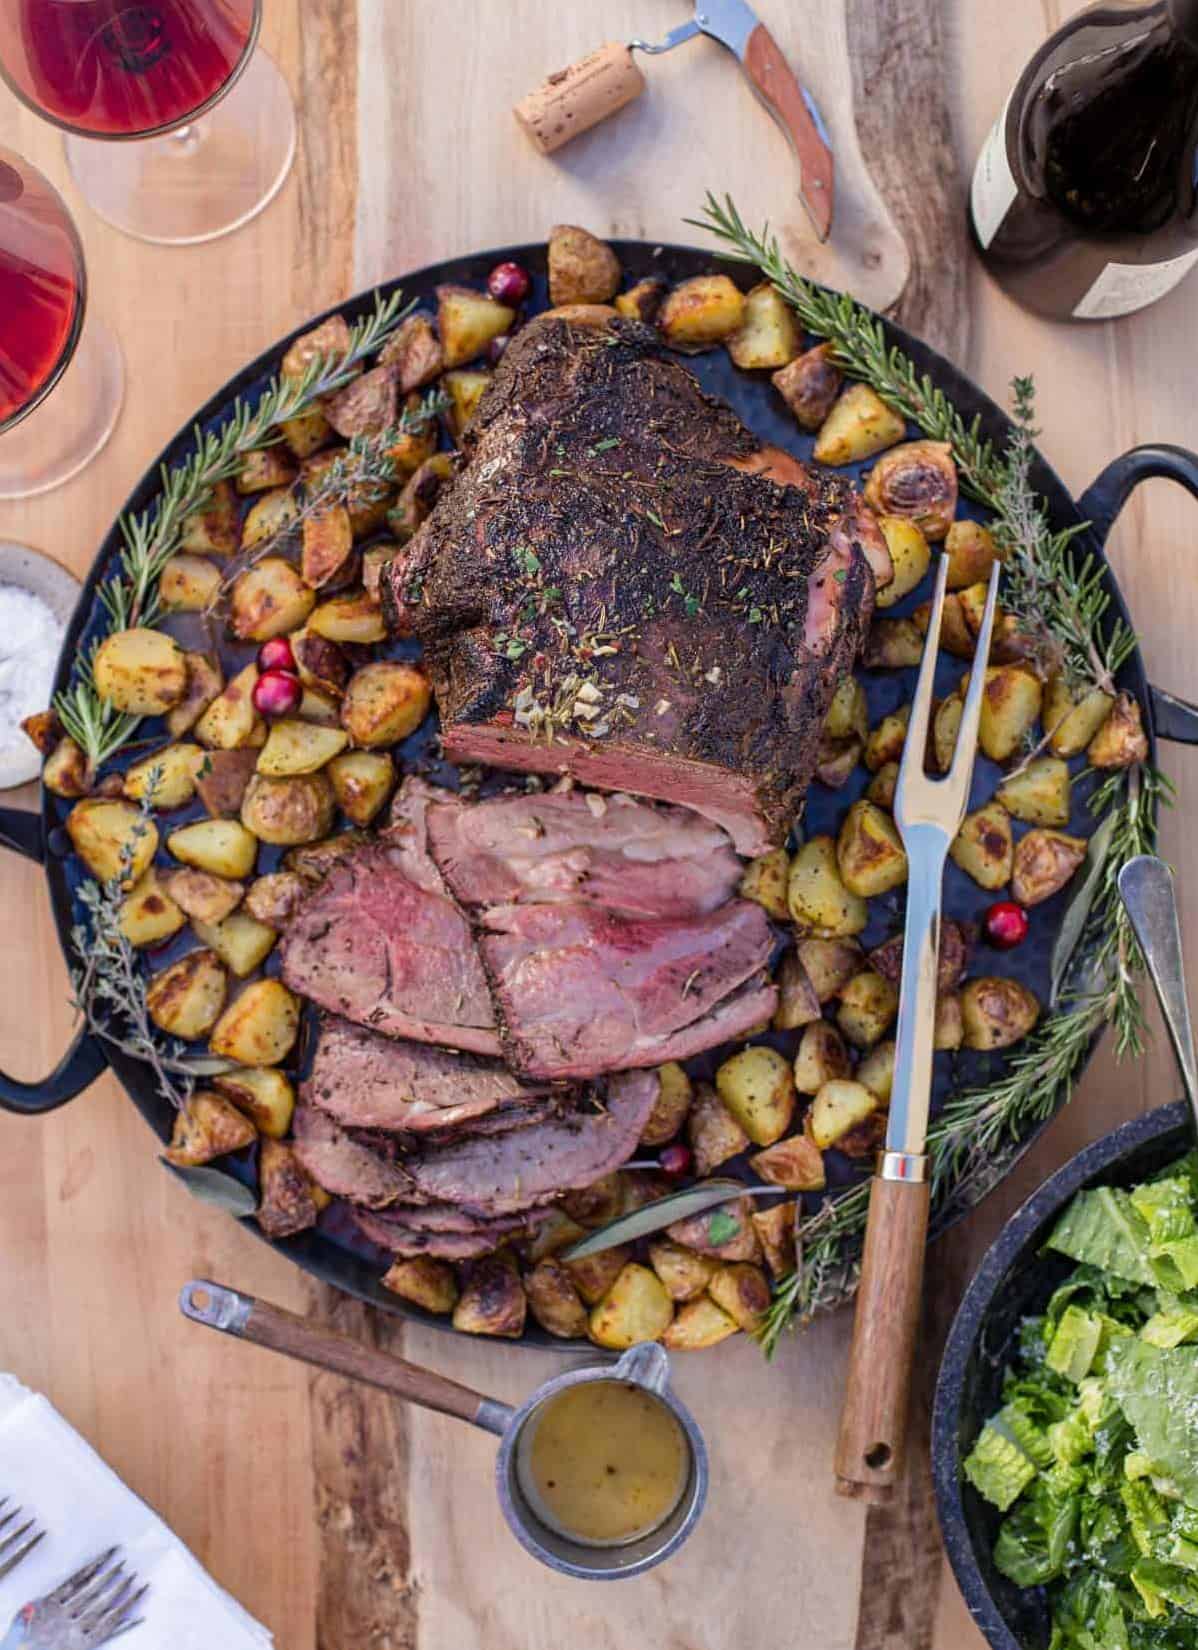  Impress your dinner guests with this easy and delicious smoked lamb roast recipe.